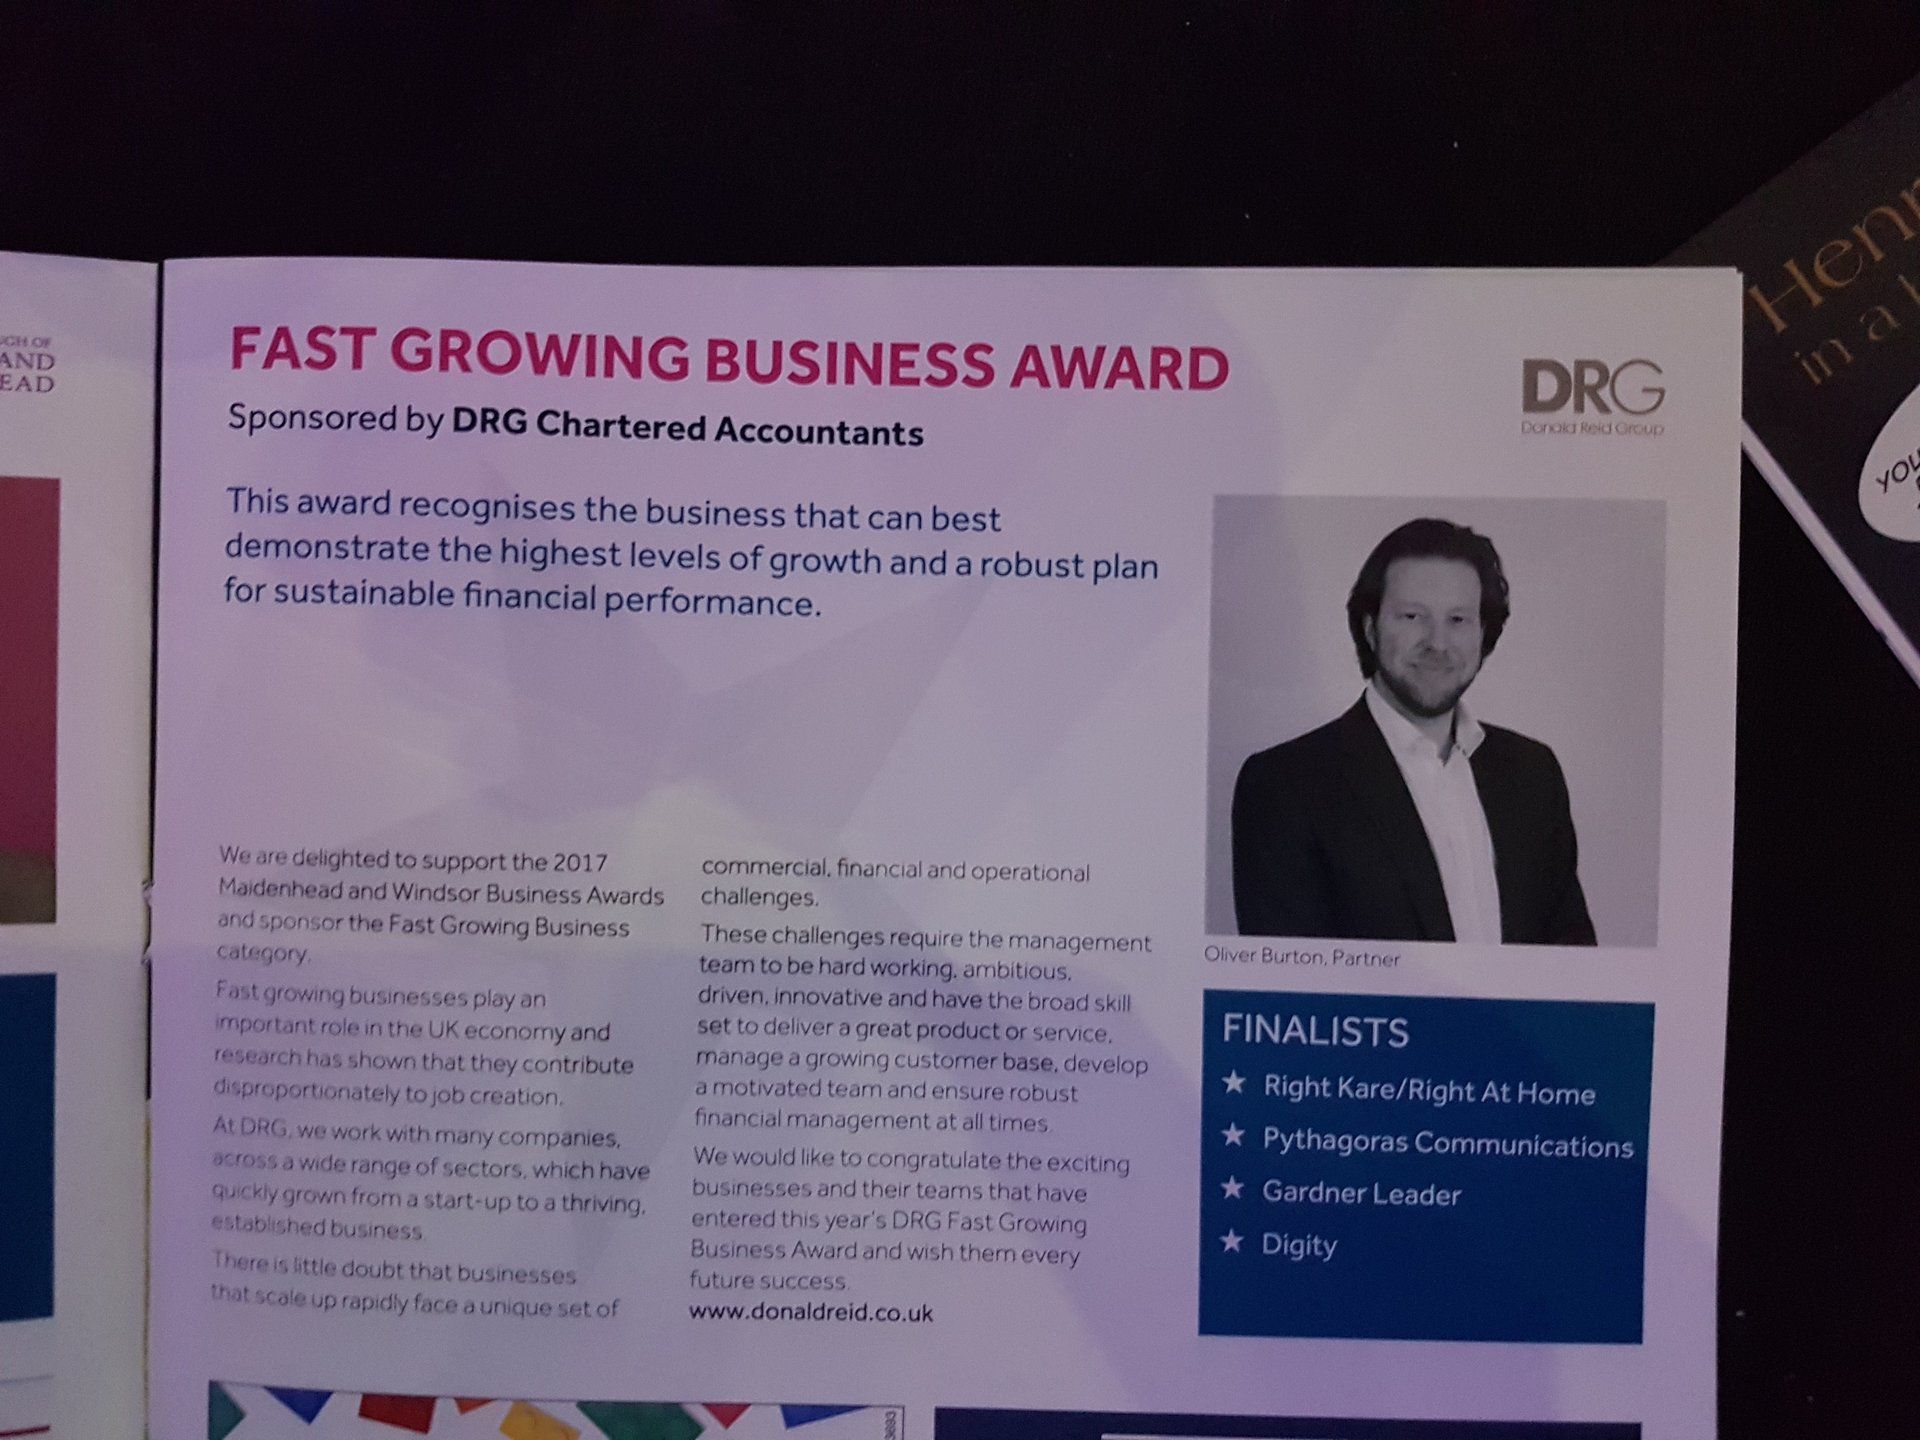 A flyer for a fast growing business award